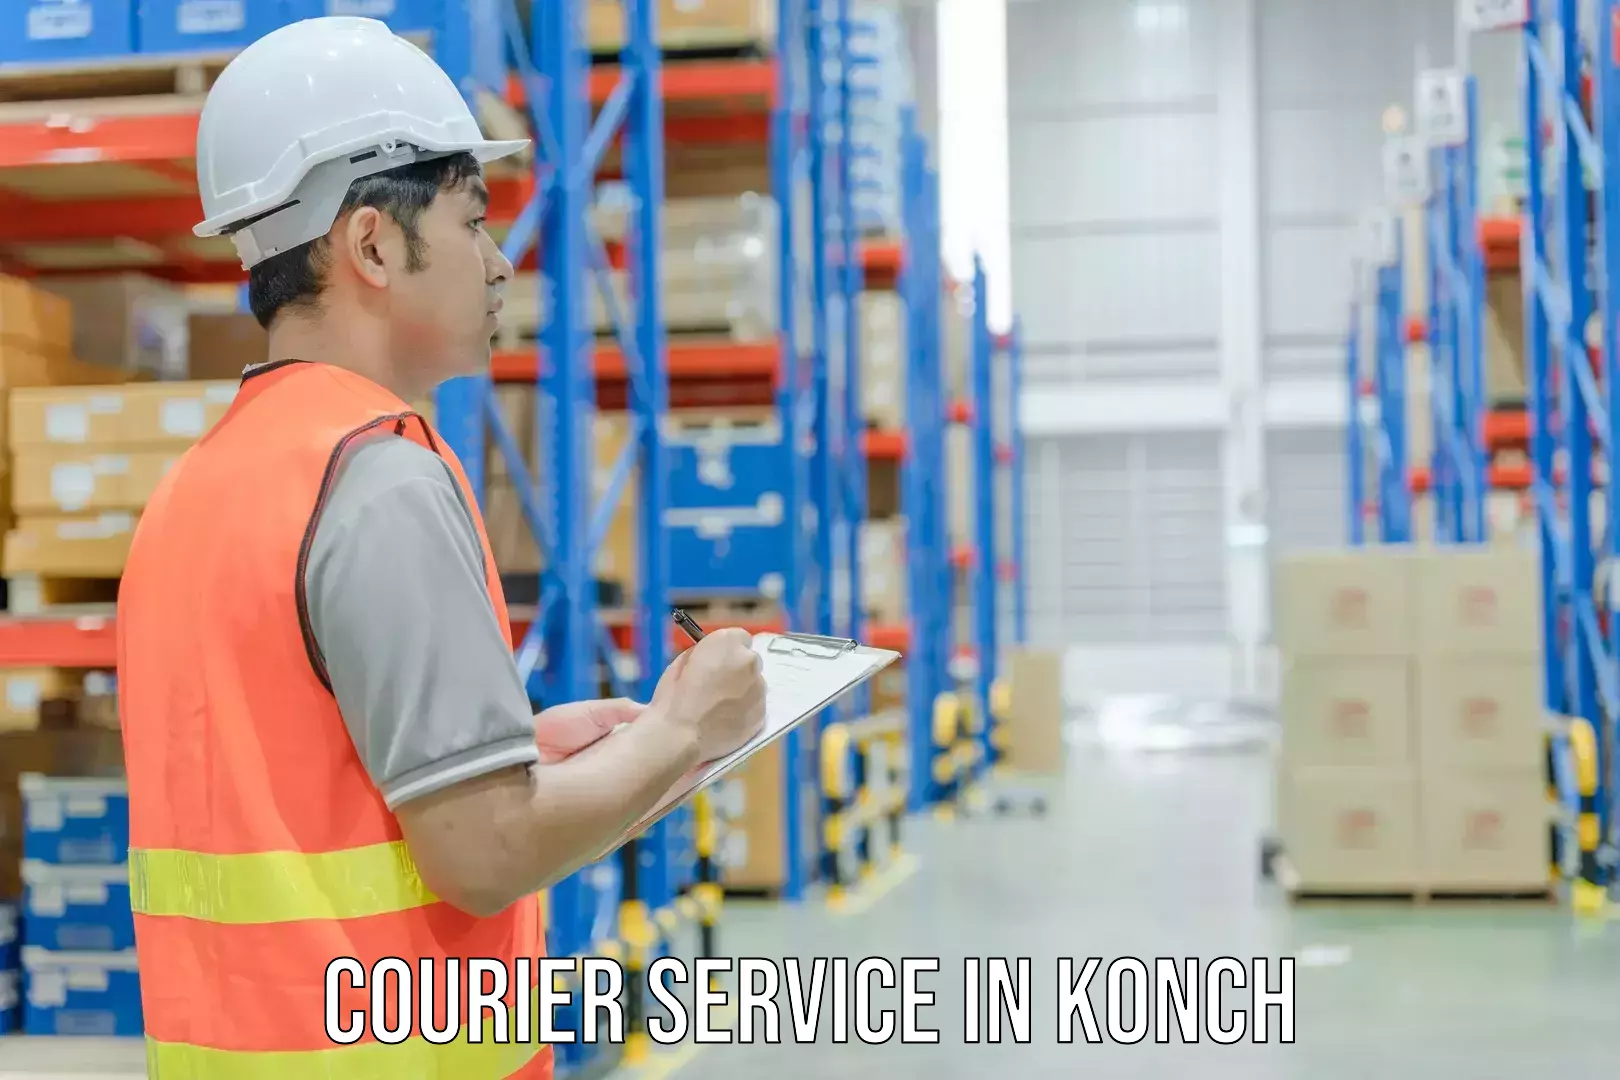 Efficient parcel tracking in Konch